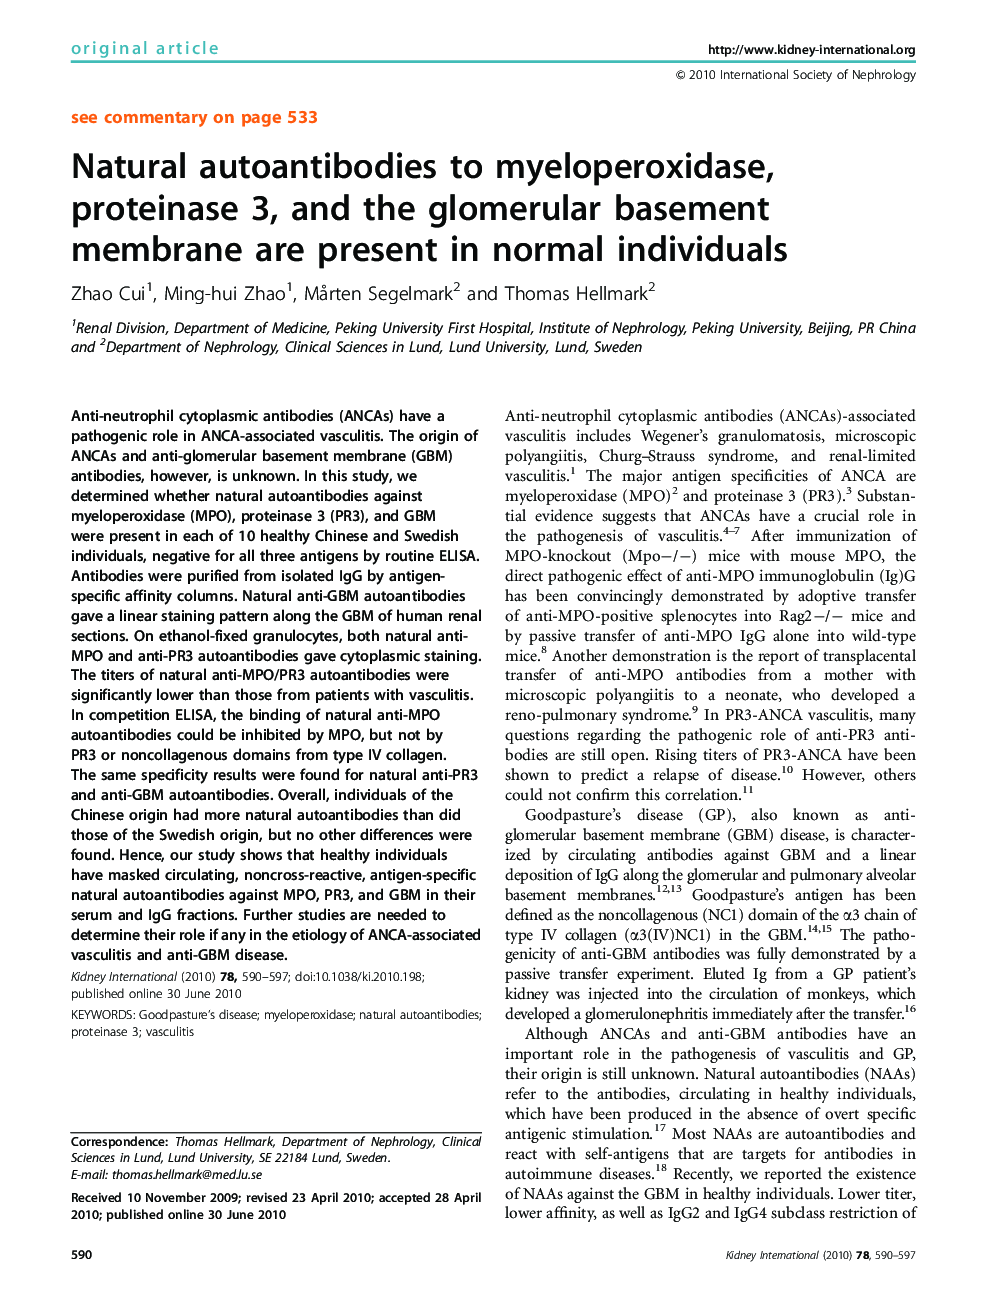 Natural autoantibodies to myeloperoxidase, proteinase 3, and the glomerular basement membrane are present in normal individuals 